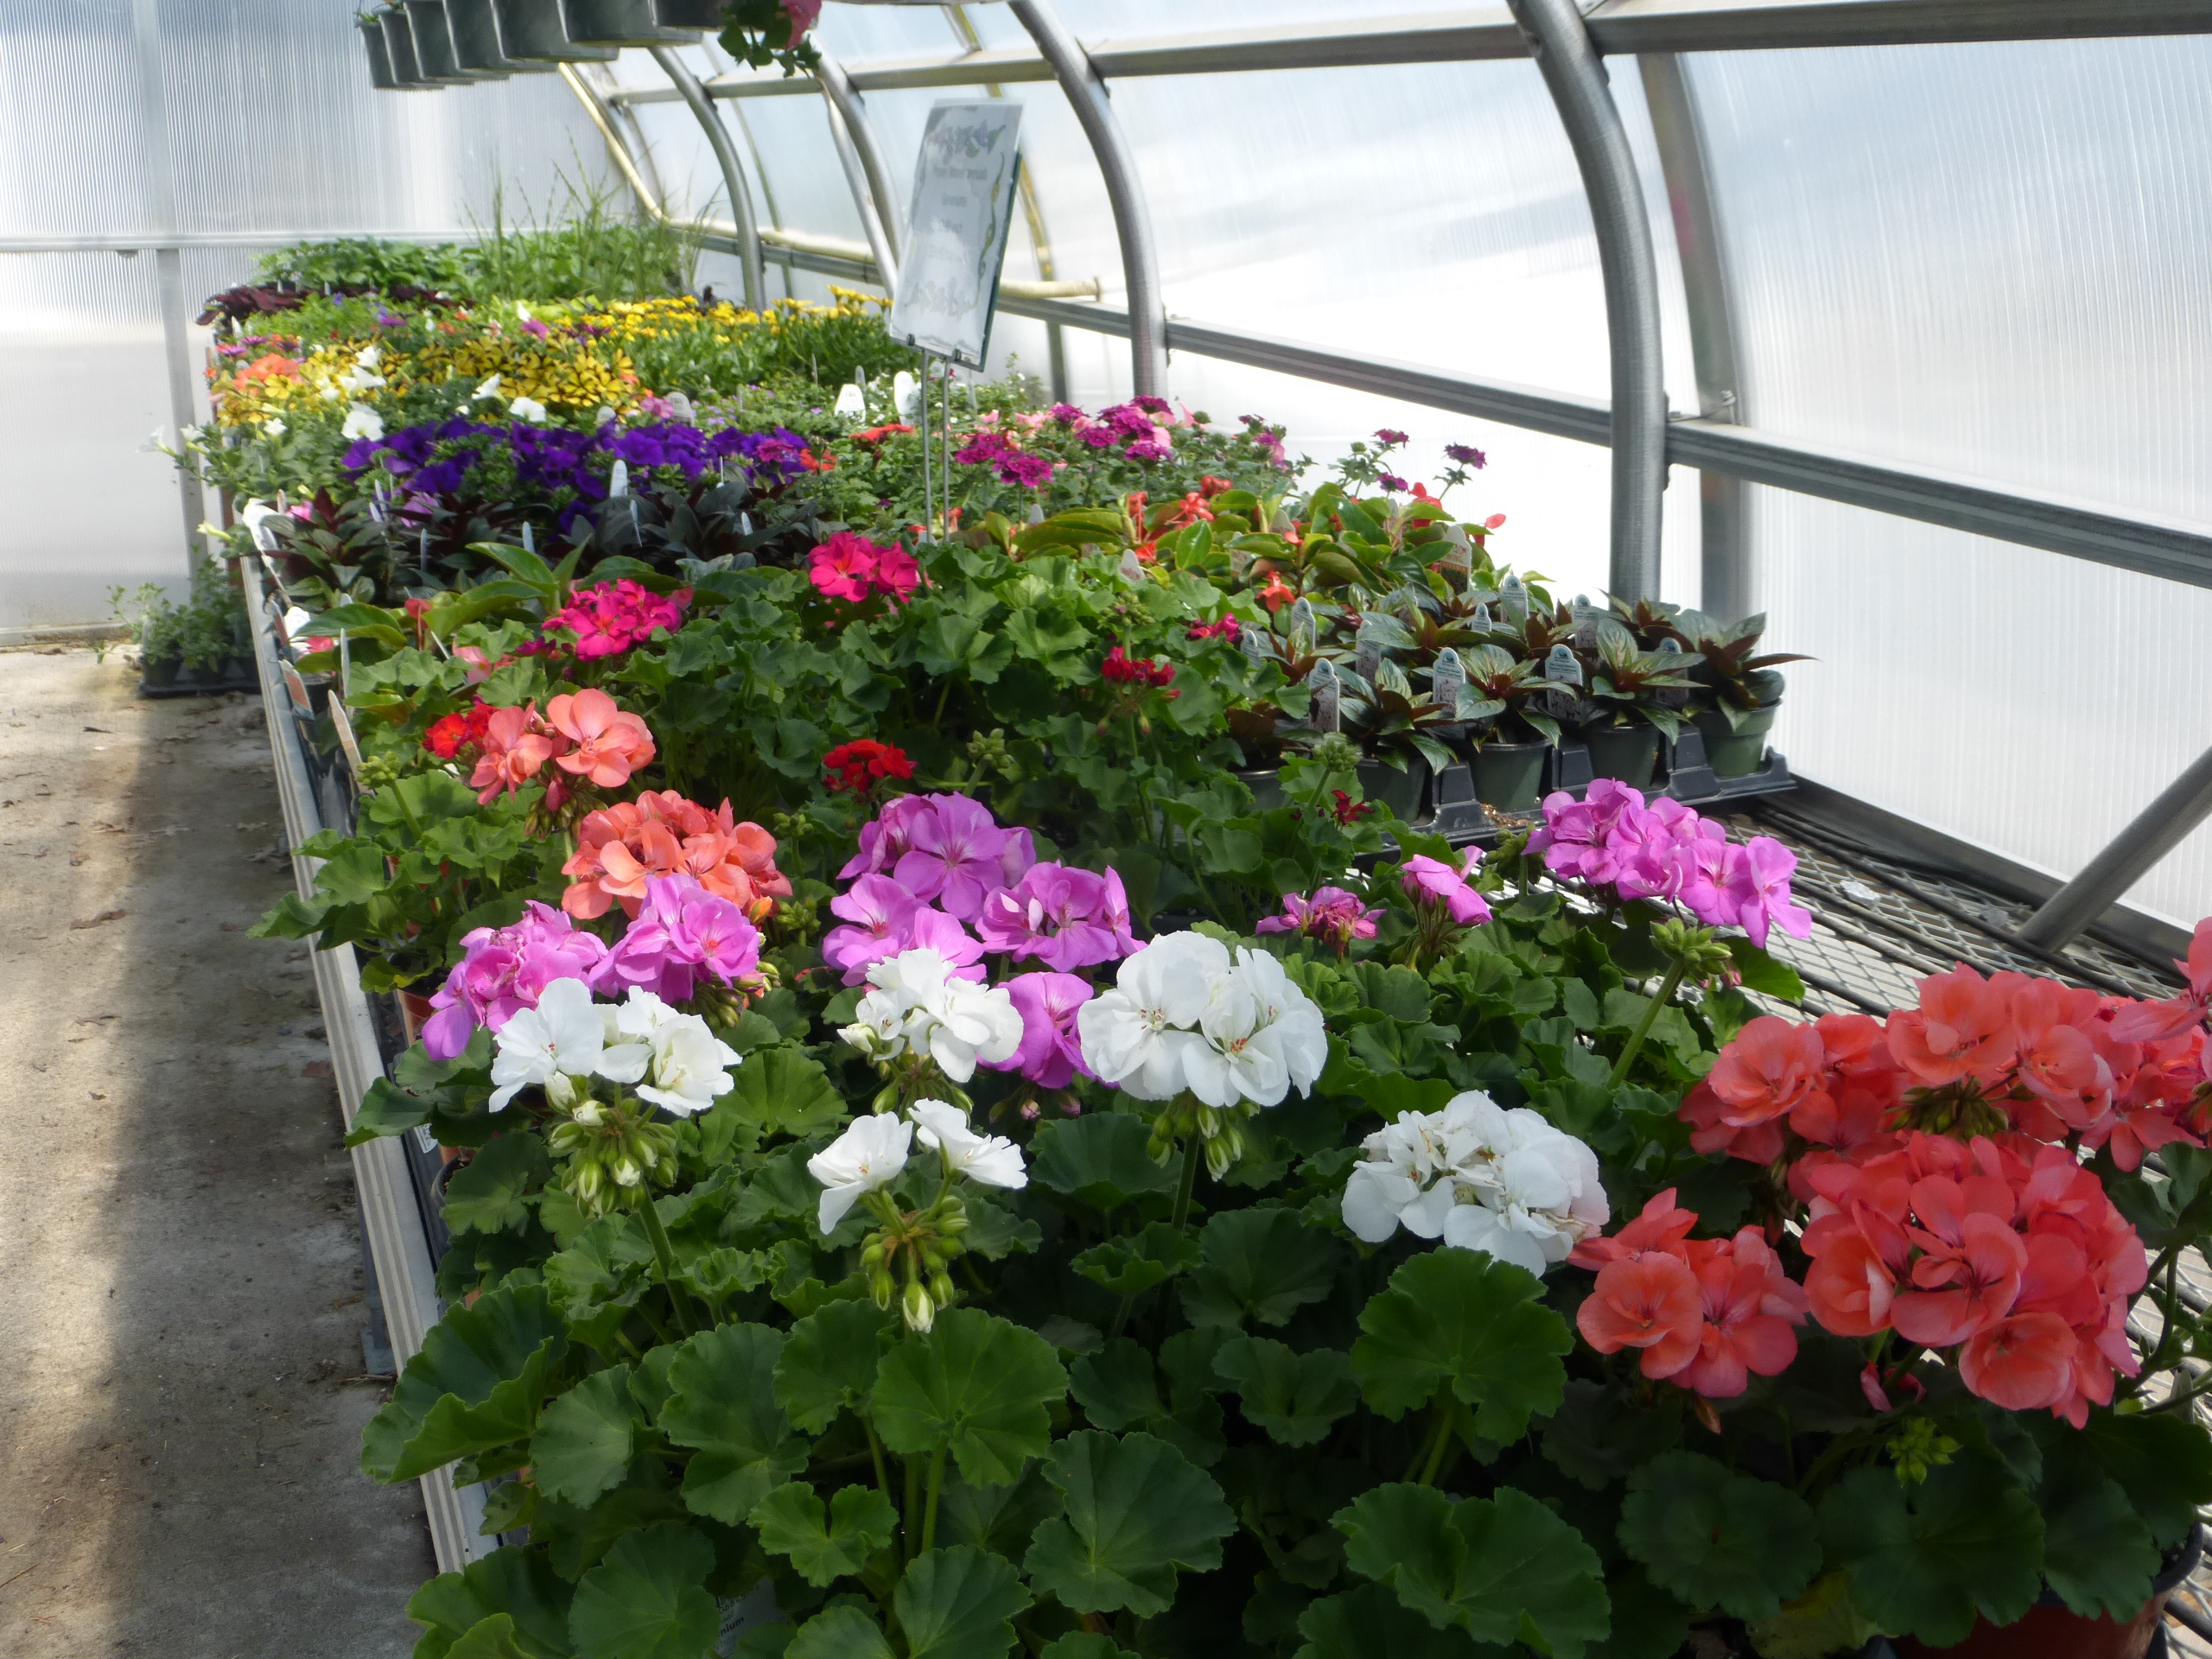 Greenhouse Flowers – Mike Fink's Produce